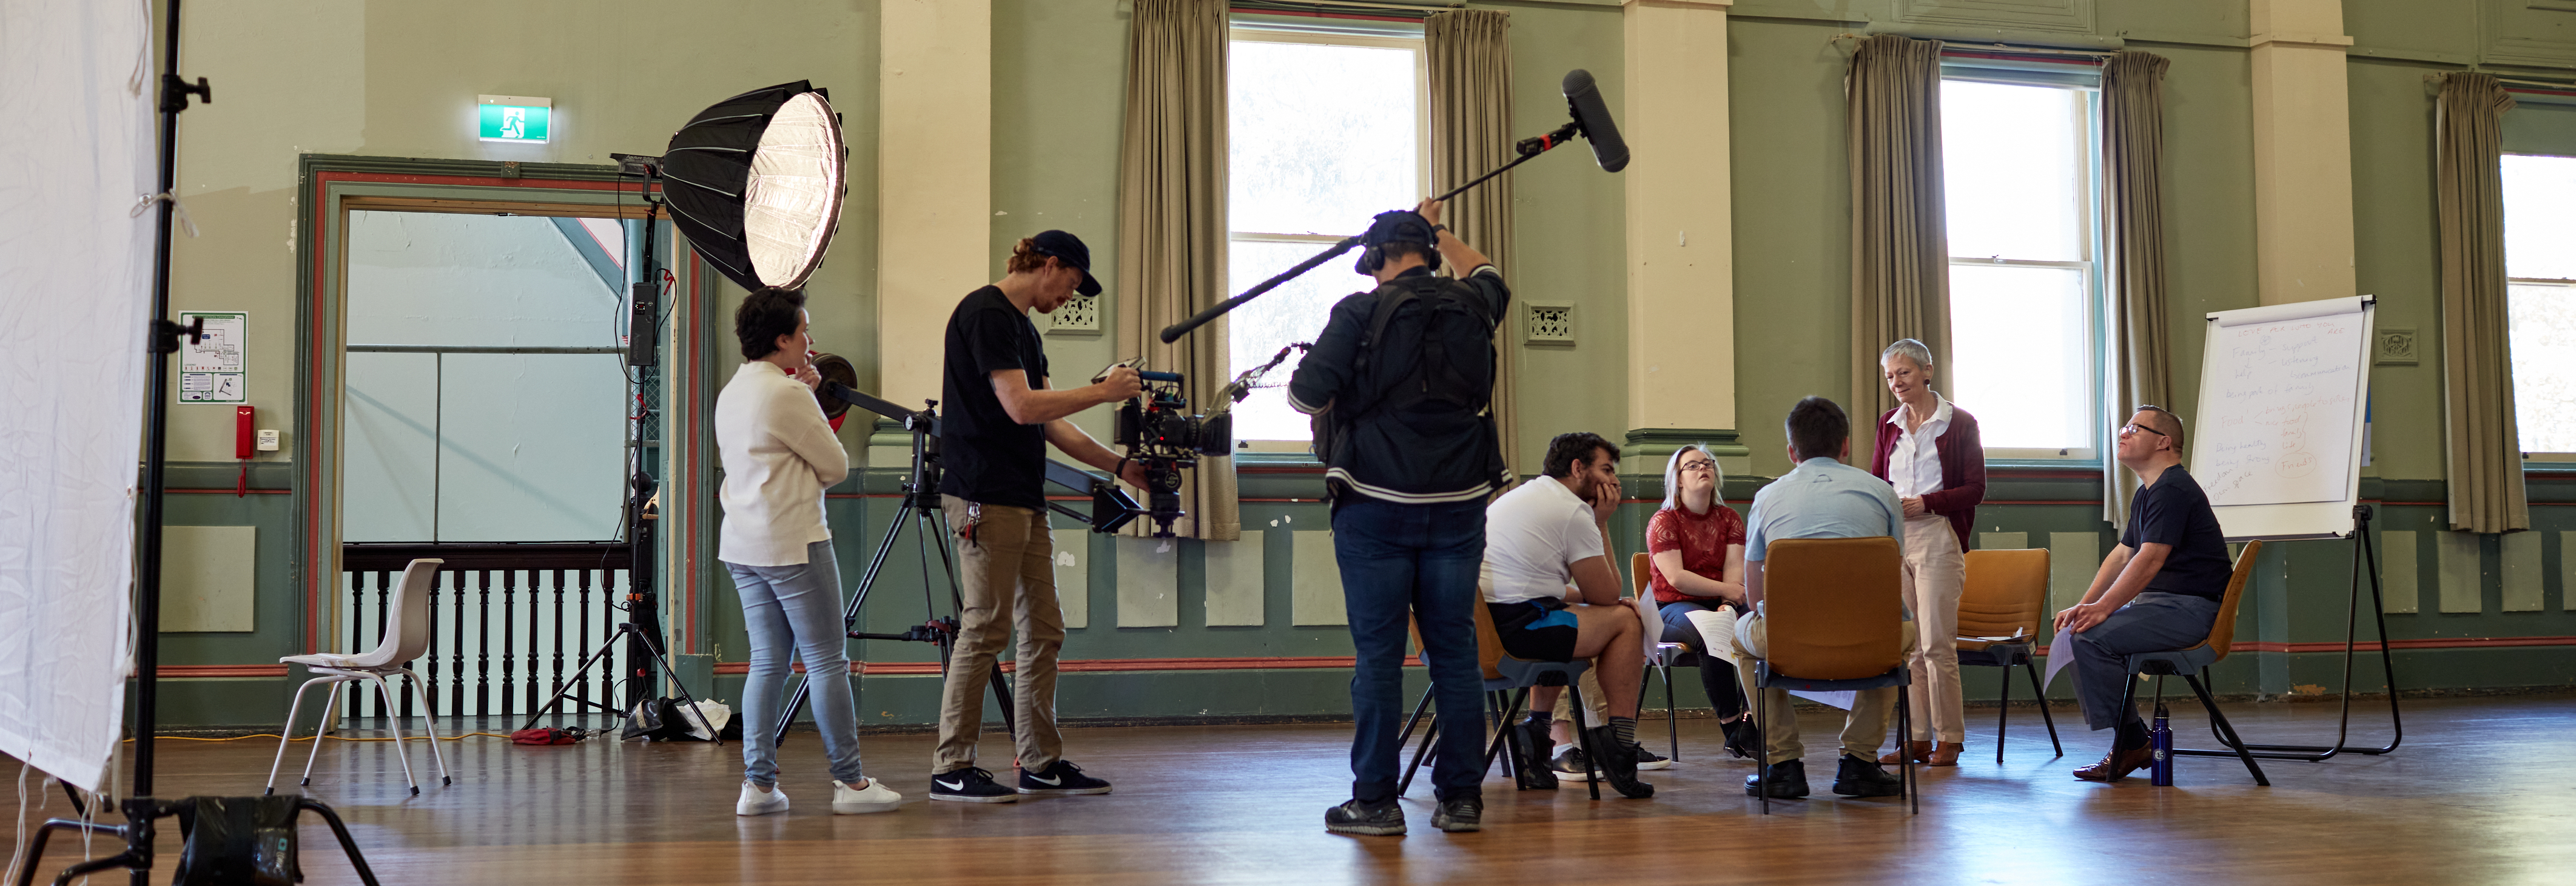 A film crew filming in a large university hall